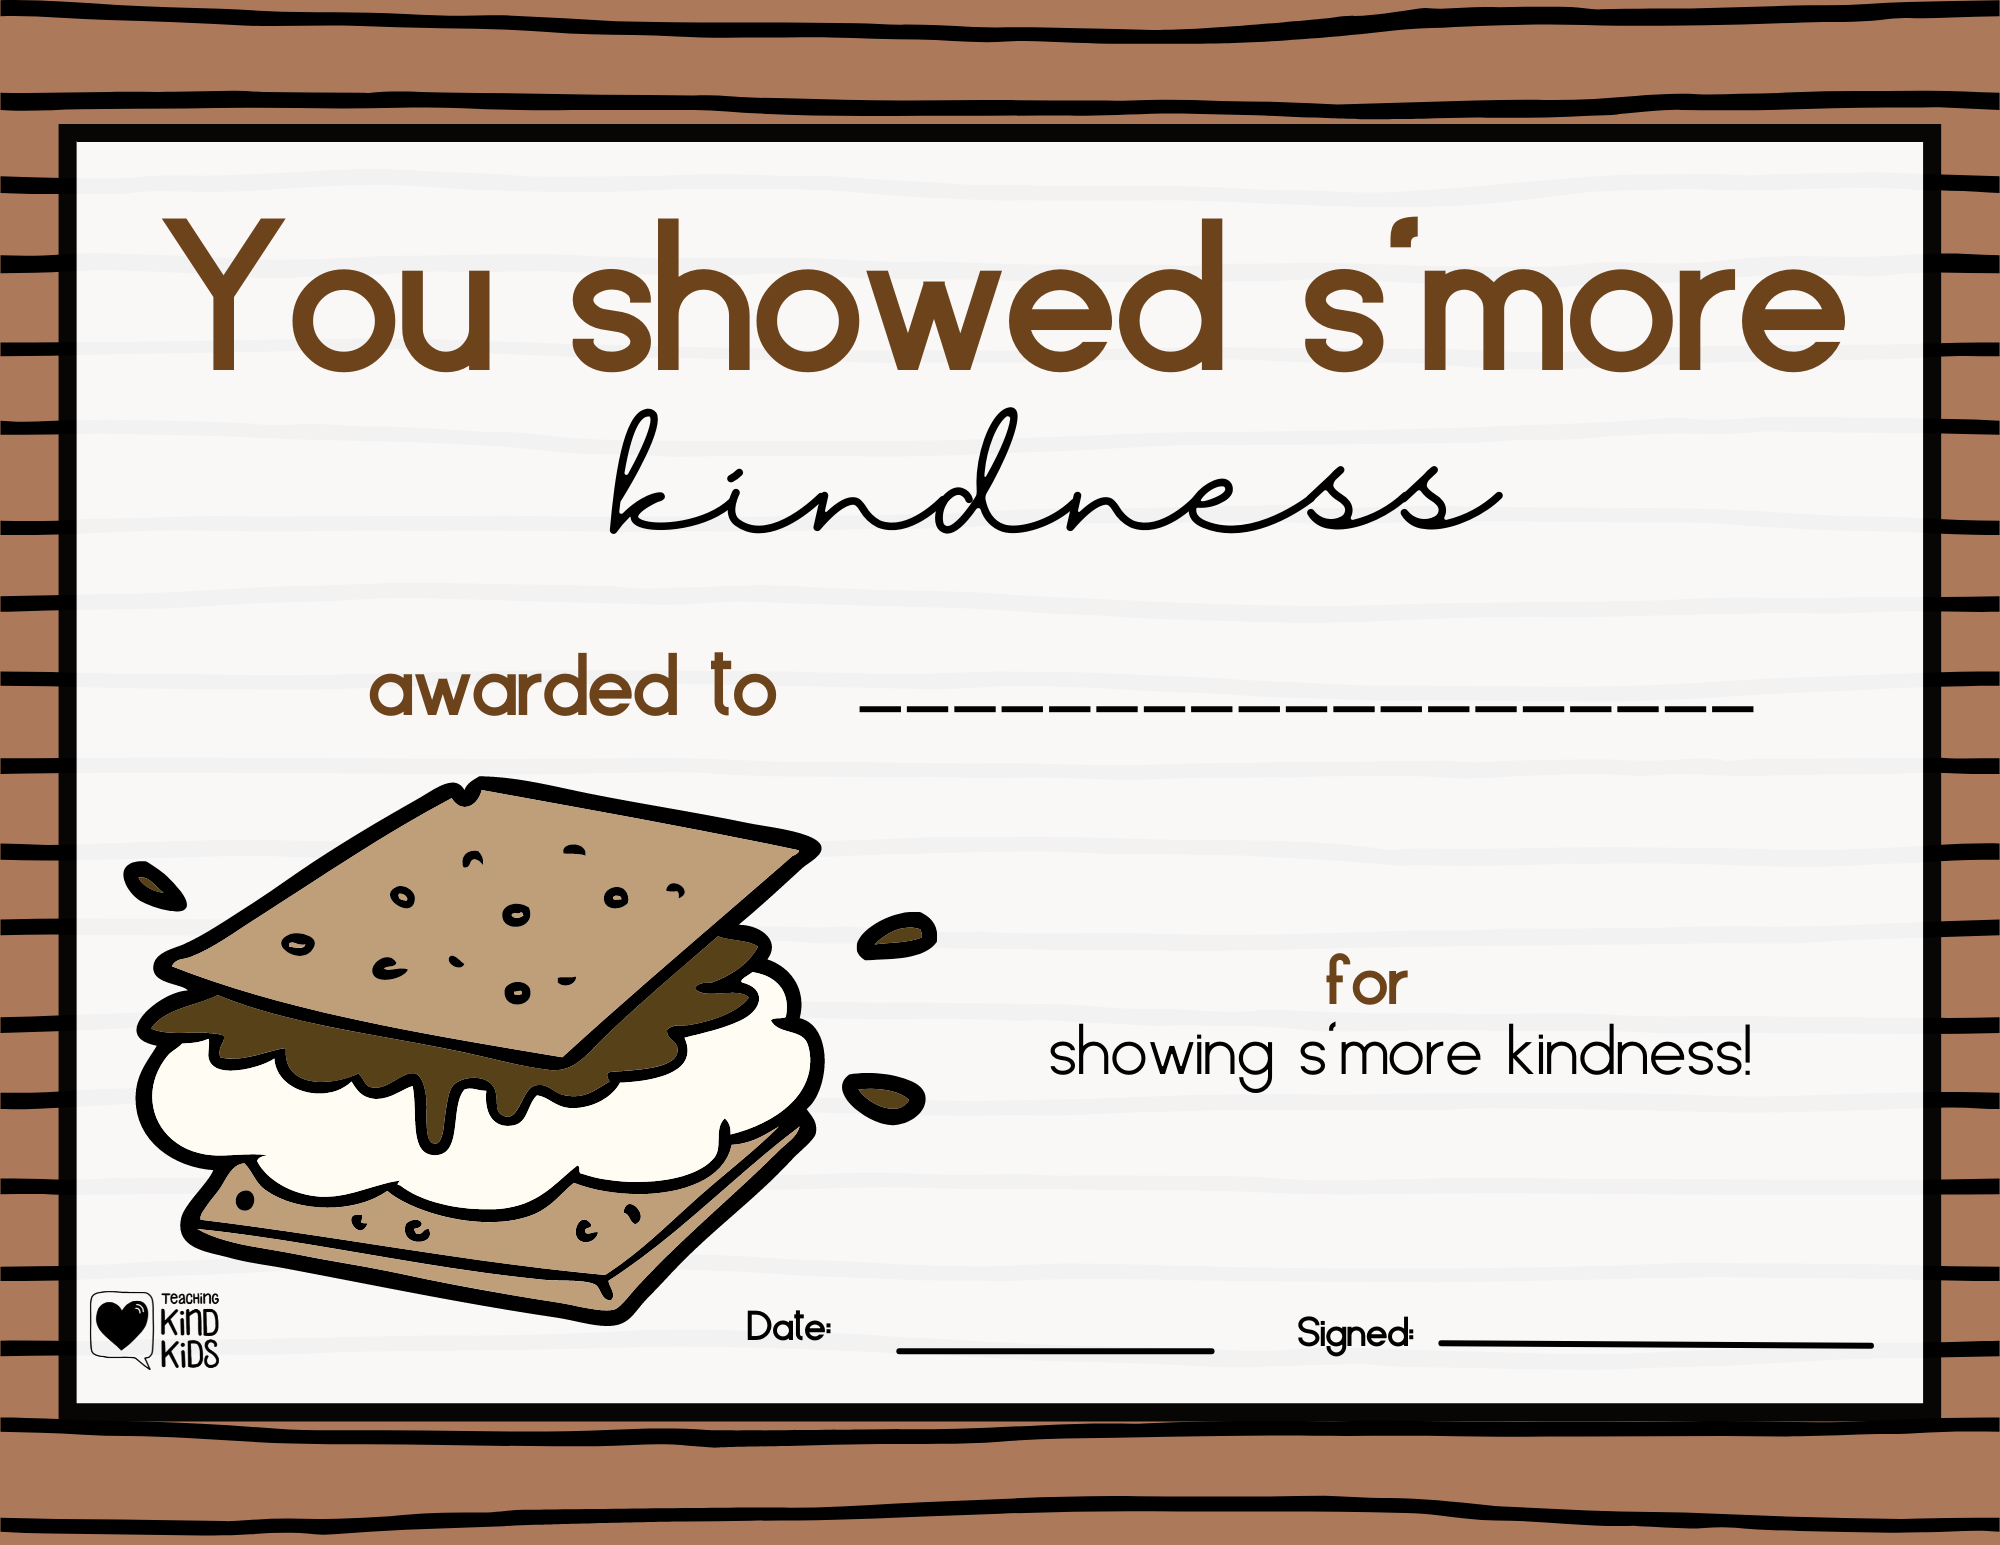 Use these Kindness Certificates to encourage kindness with positive reinforcement to encourage more kindness. 